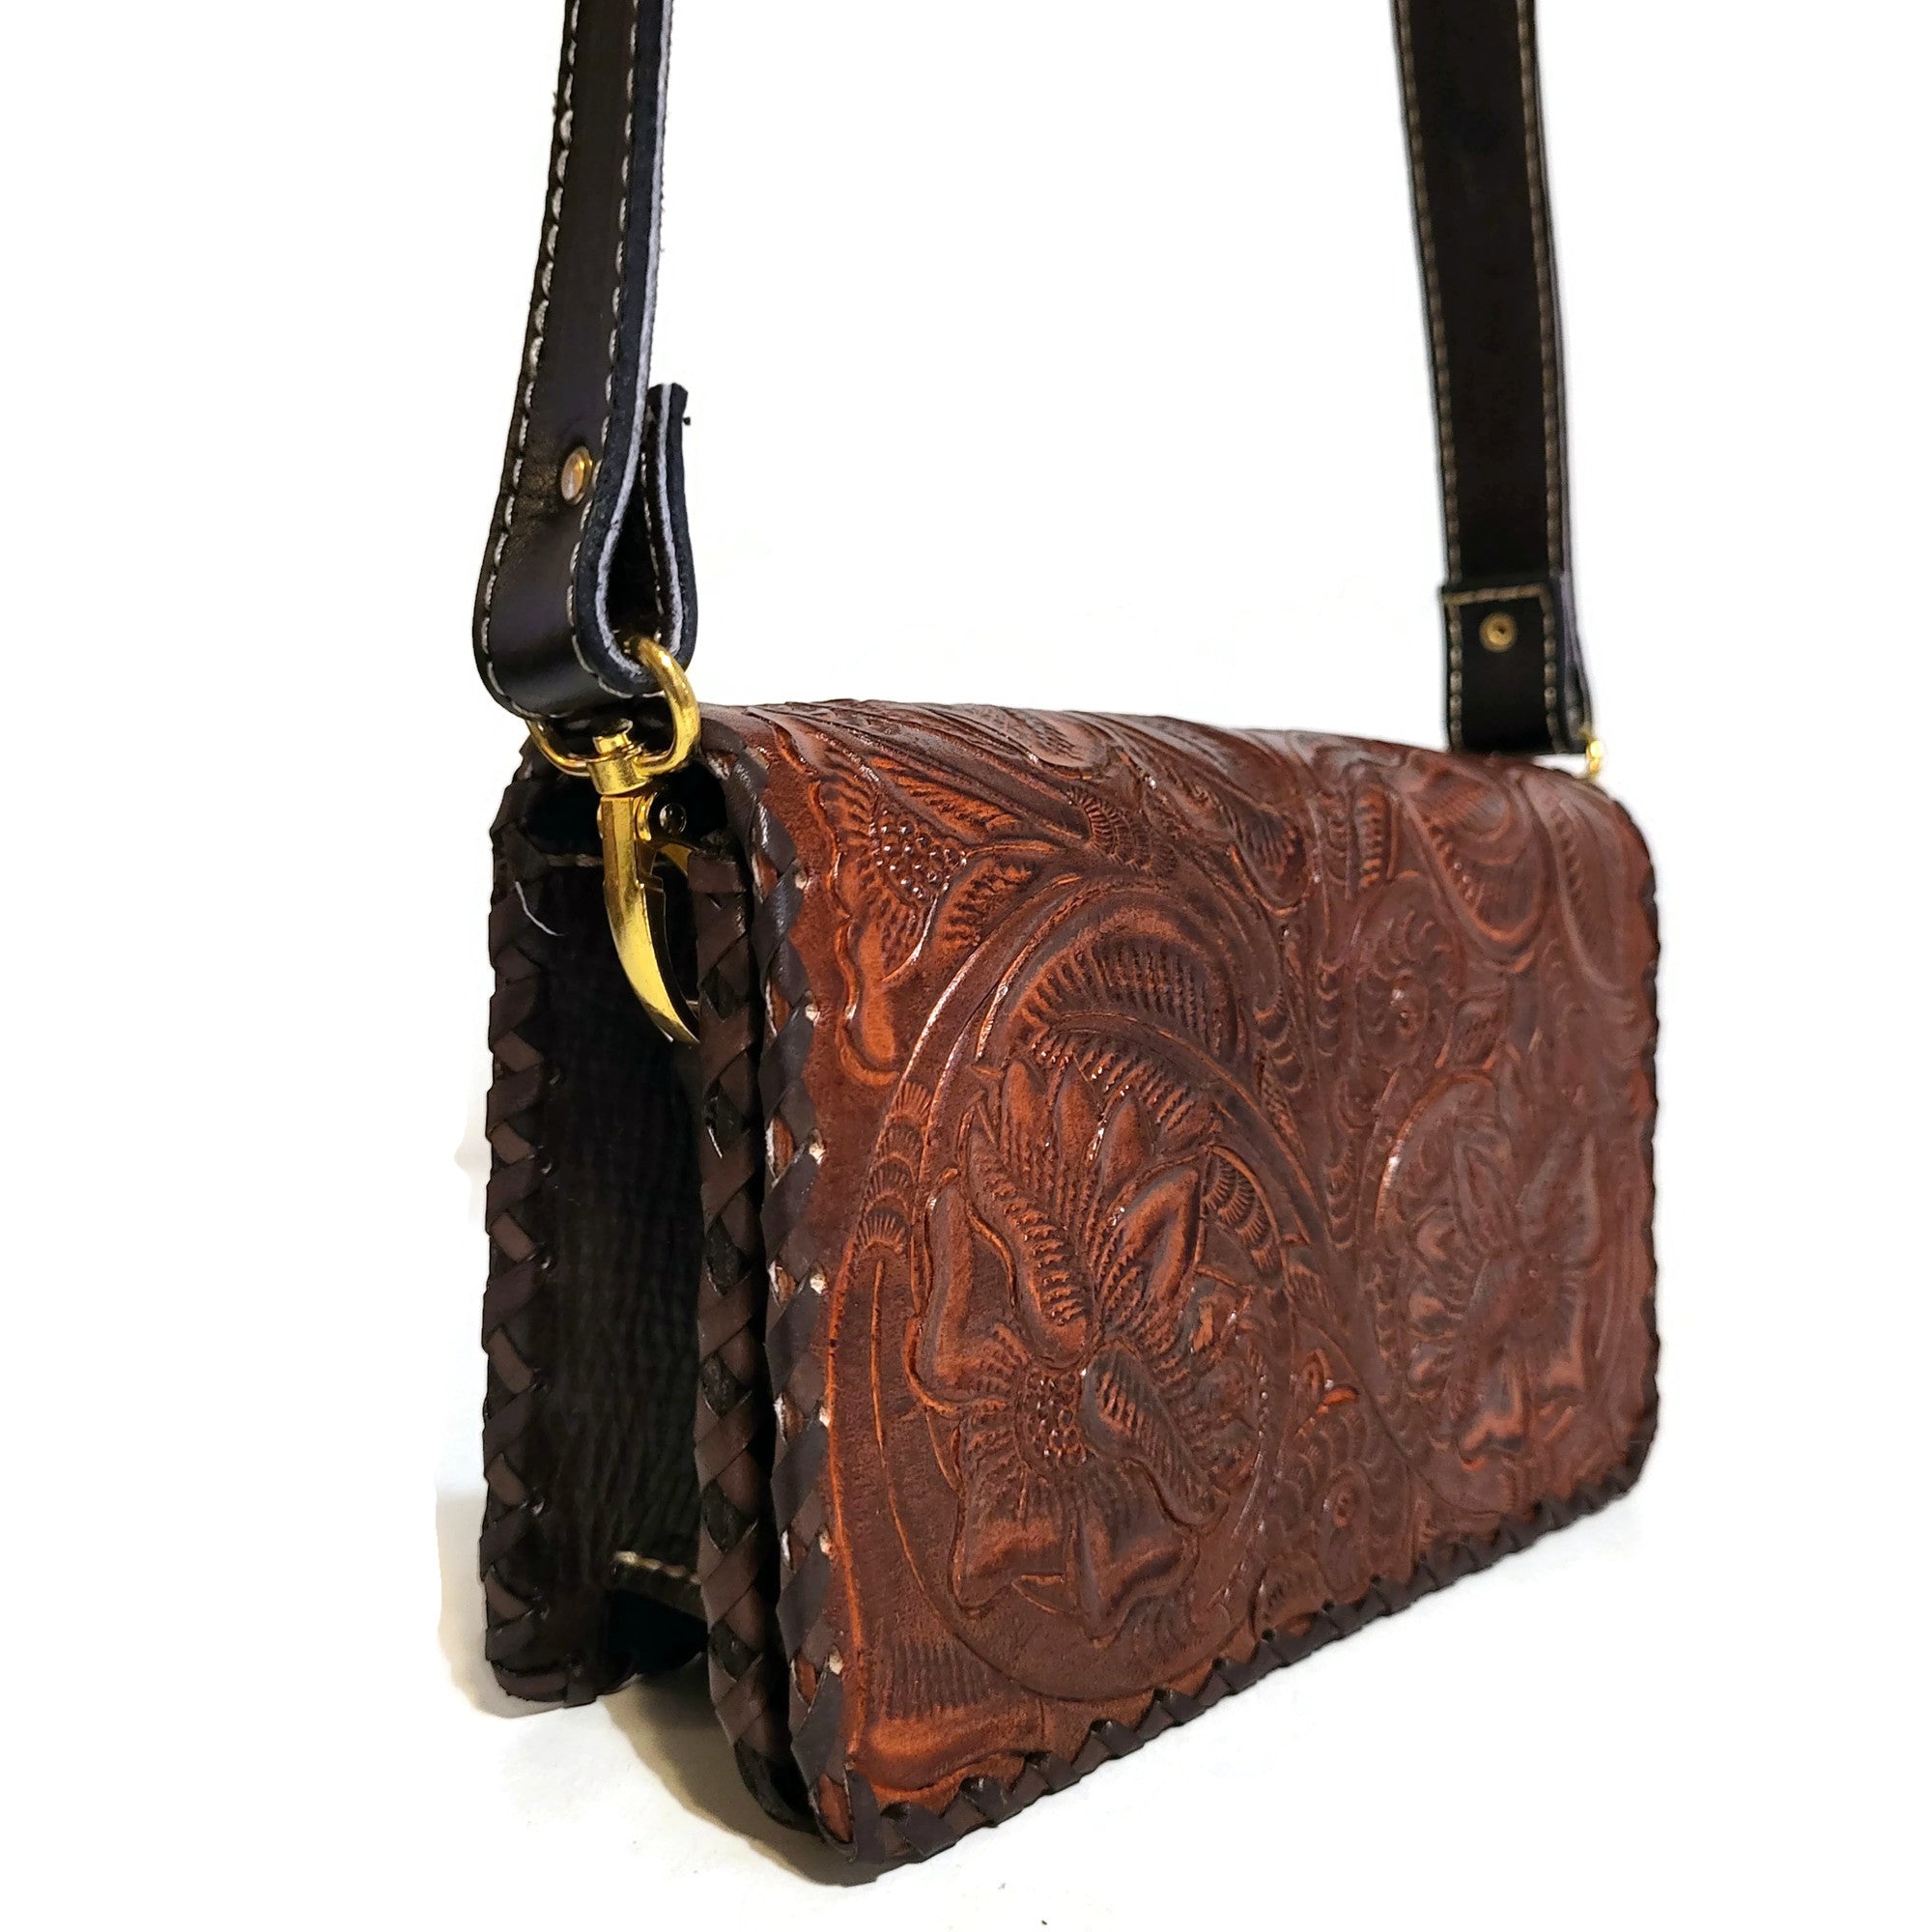 Hand tooled leather bag for women, small bag